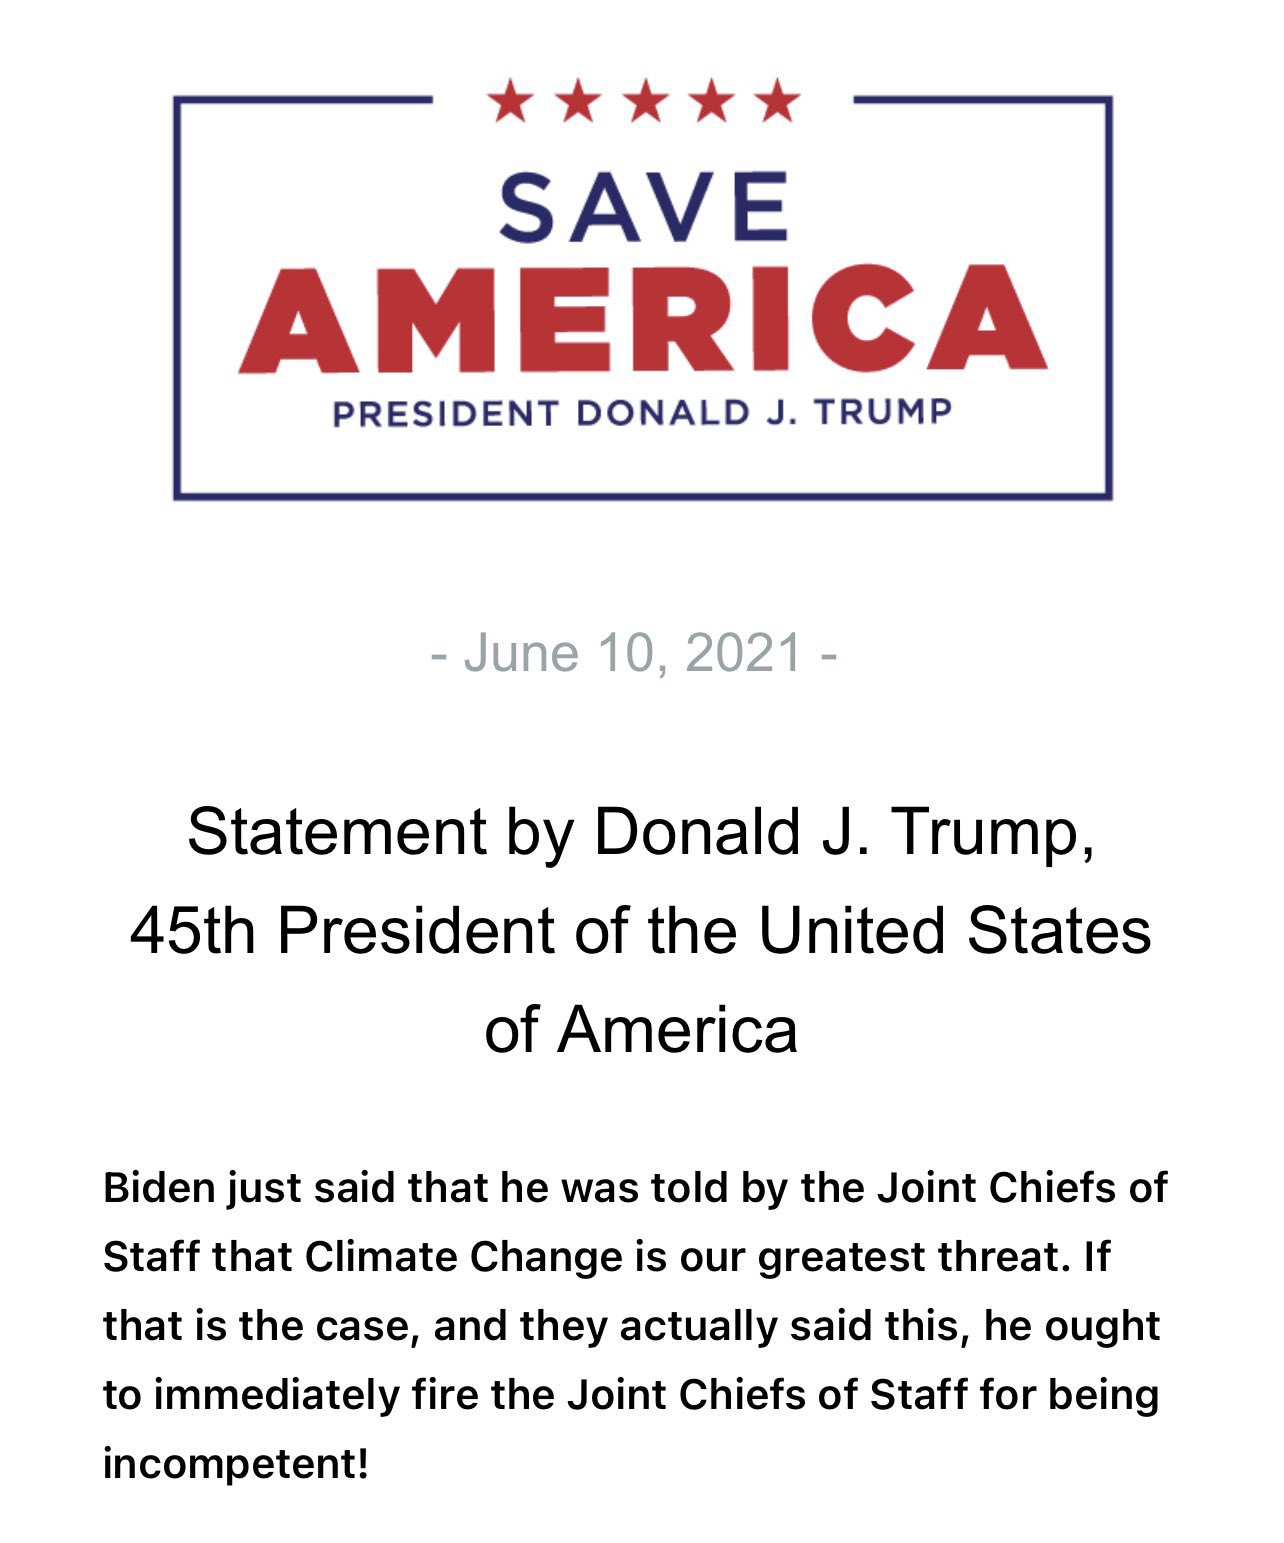 Trump blasts Joint Chiefs of Staff in new statement after Biden claims they told him “climate change” is the biggest threat to America.